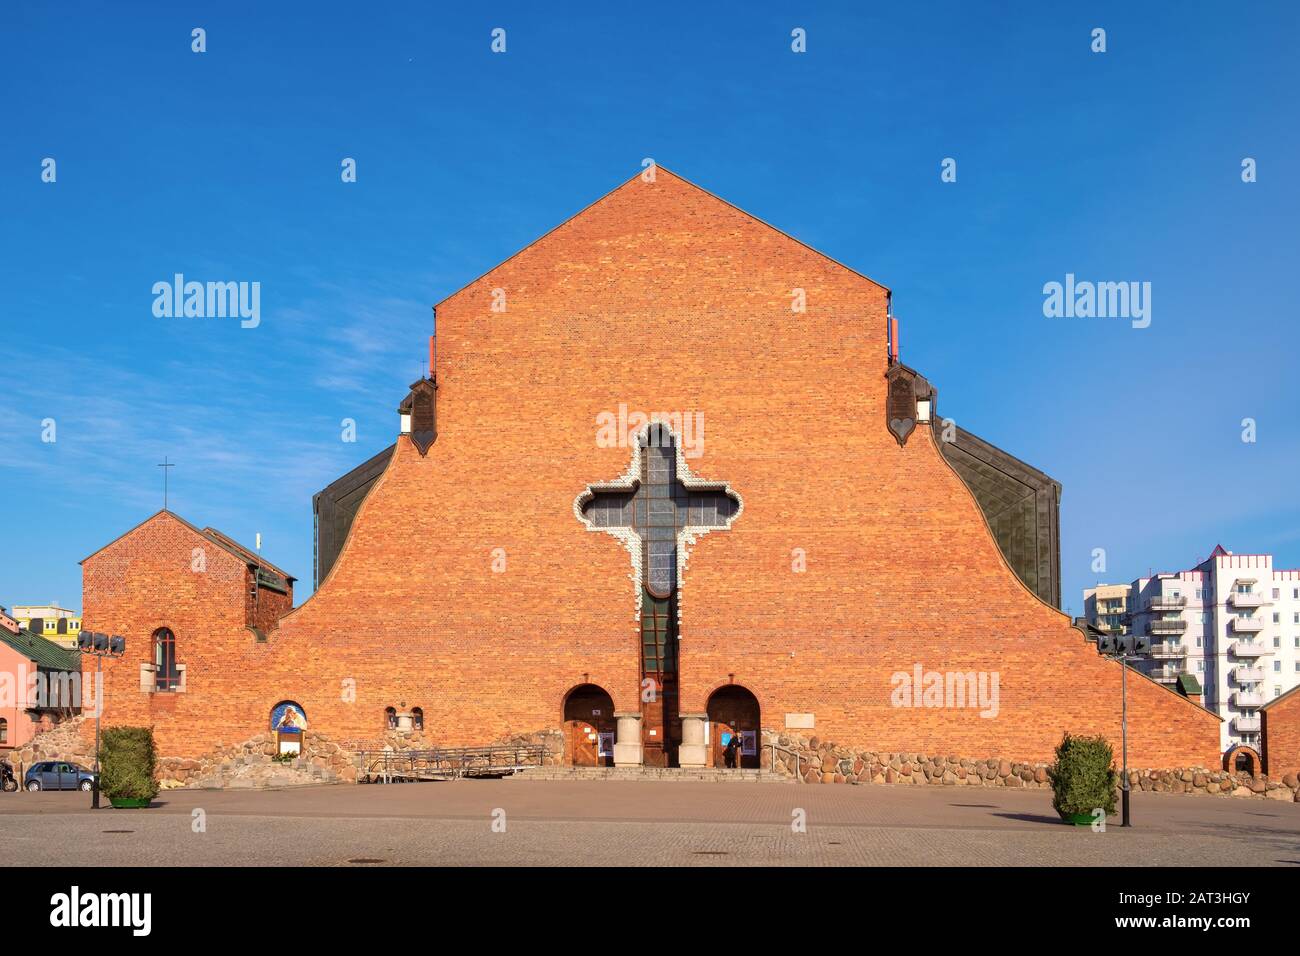 Warsaw, Mazovia / Poland - 2019/02/23: Brick modernistic facade of the Holy Ascension church in Stoklosy district of Warsaw, in Ursynow part of the city. Stock Photo